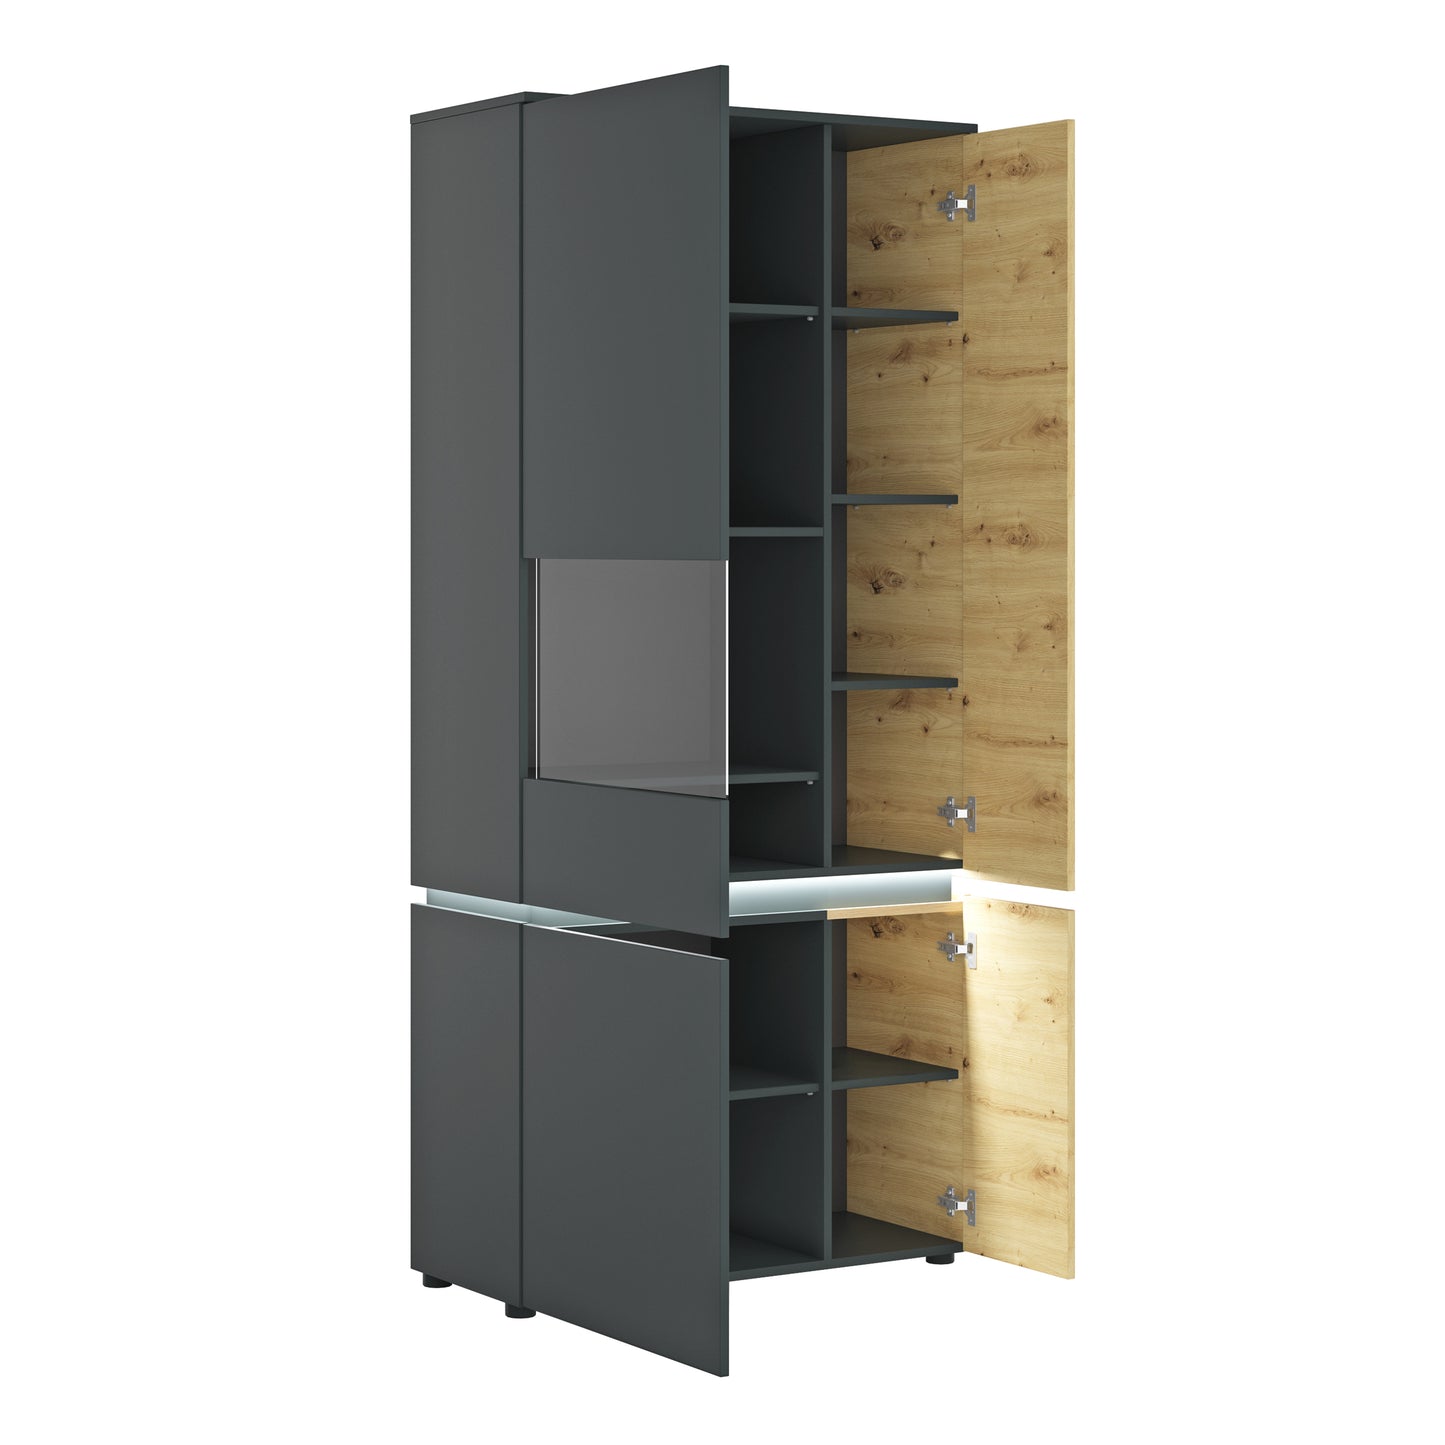 Luci Dark Luci 4 door tall display cabinet LH (including LED lighting) in Platinum and Oak